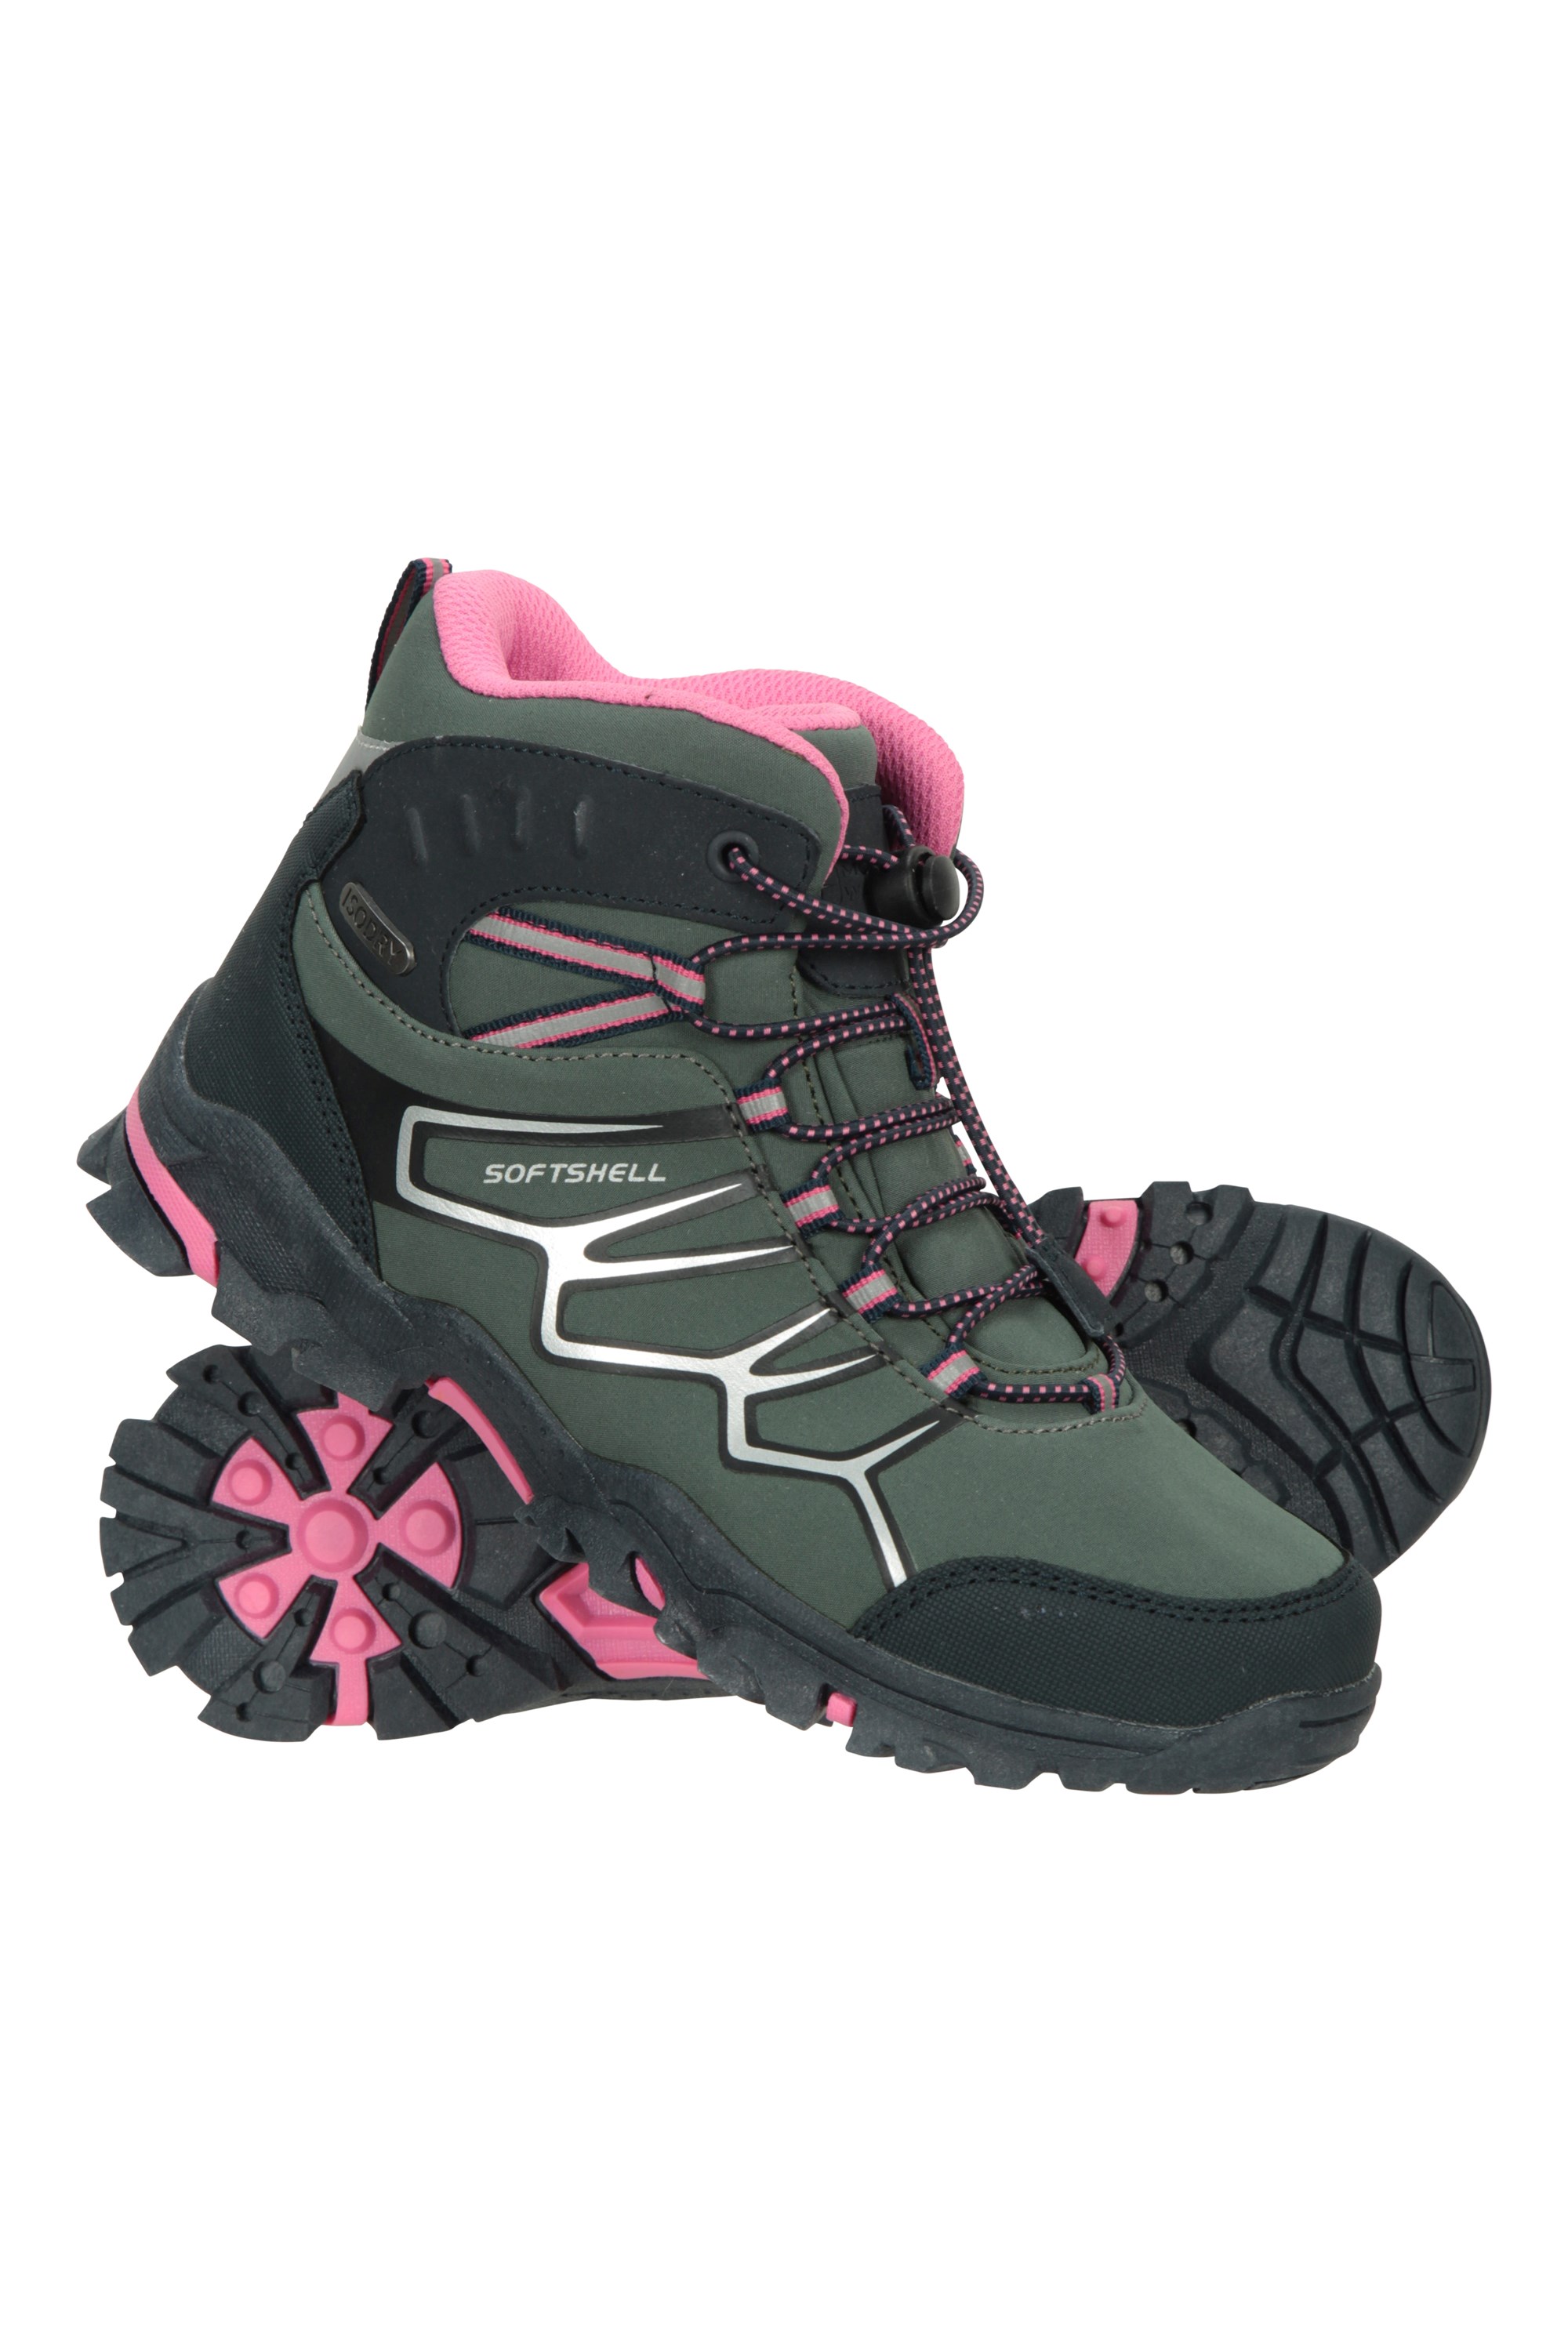 Mountain Warehouse Waterproof Kids Boots Breathable Hiking Shoes 